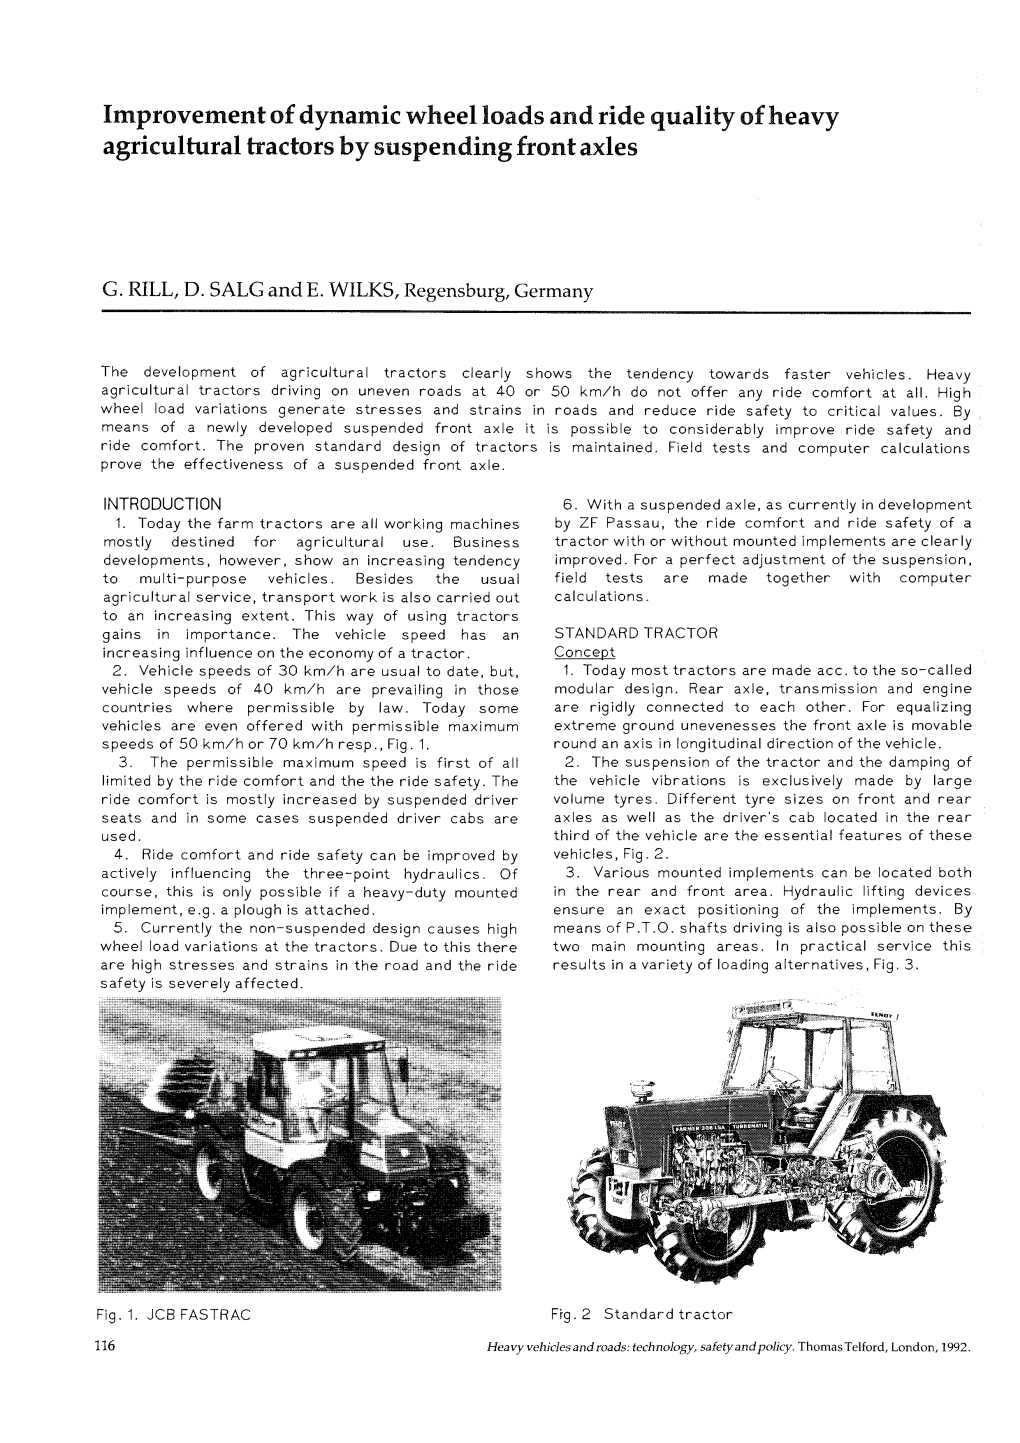 Improvement of Dynamic Wheel Loads and Ride Quality of Heavy Agricultural Tractors by Suspending Front Axles